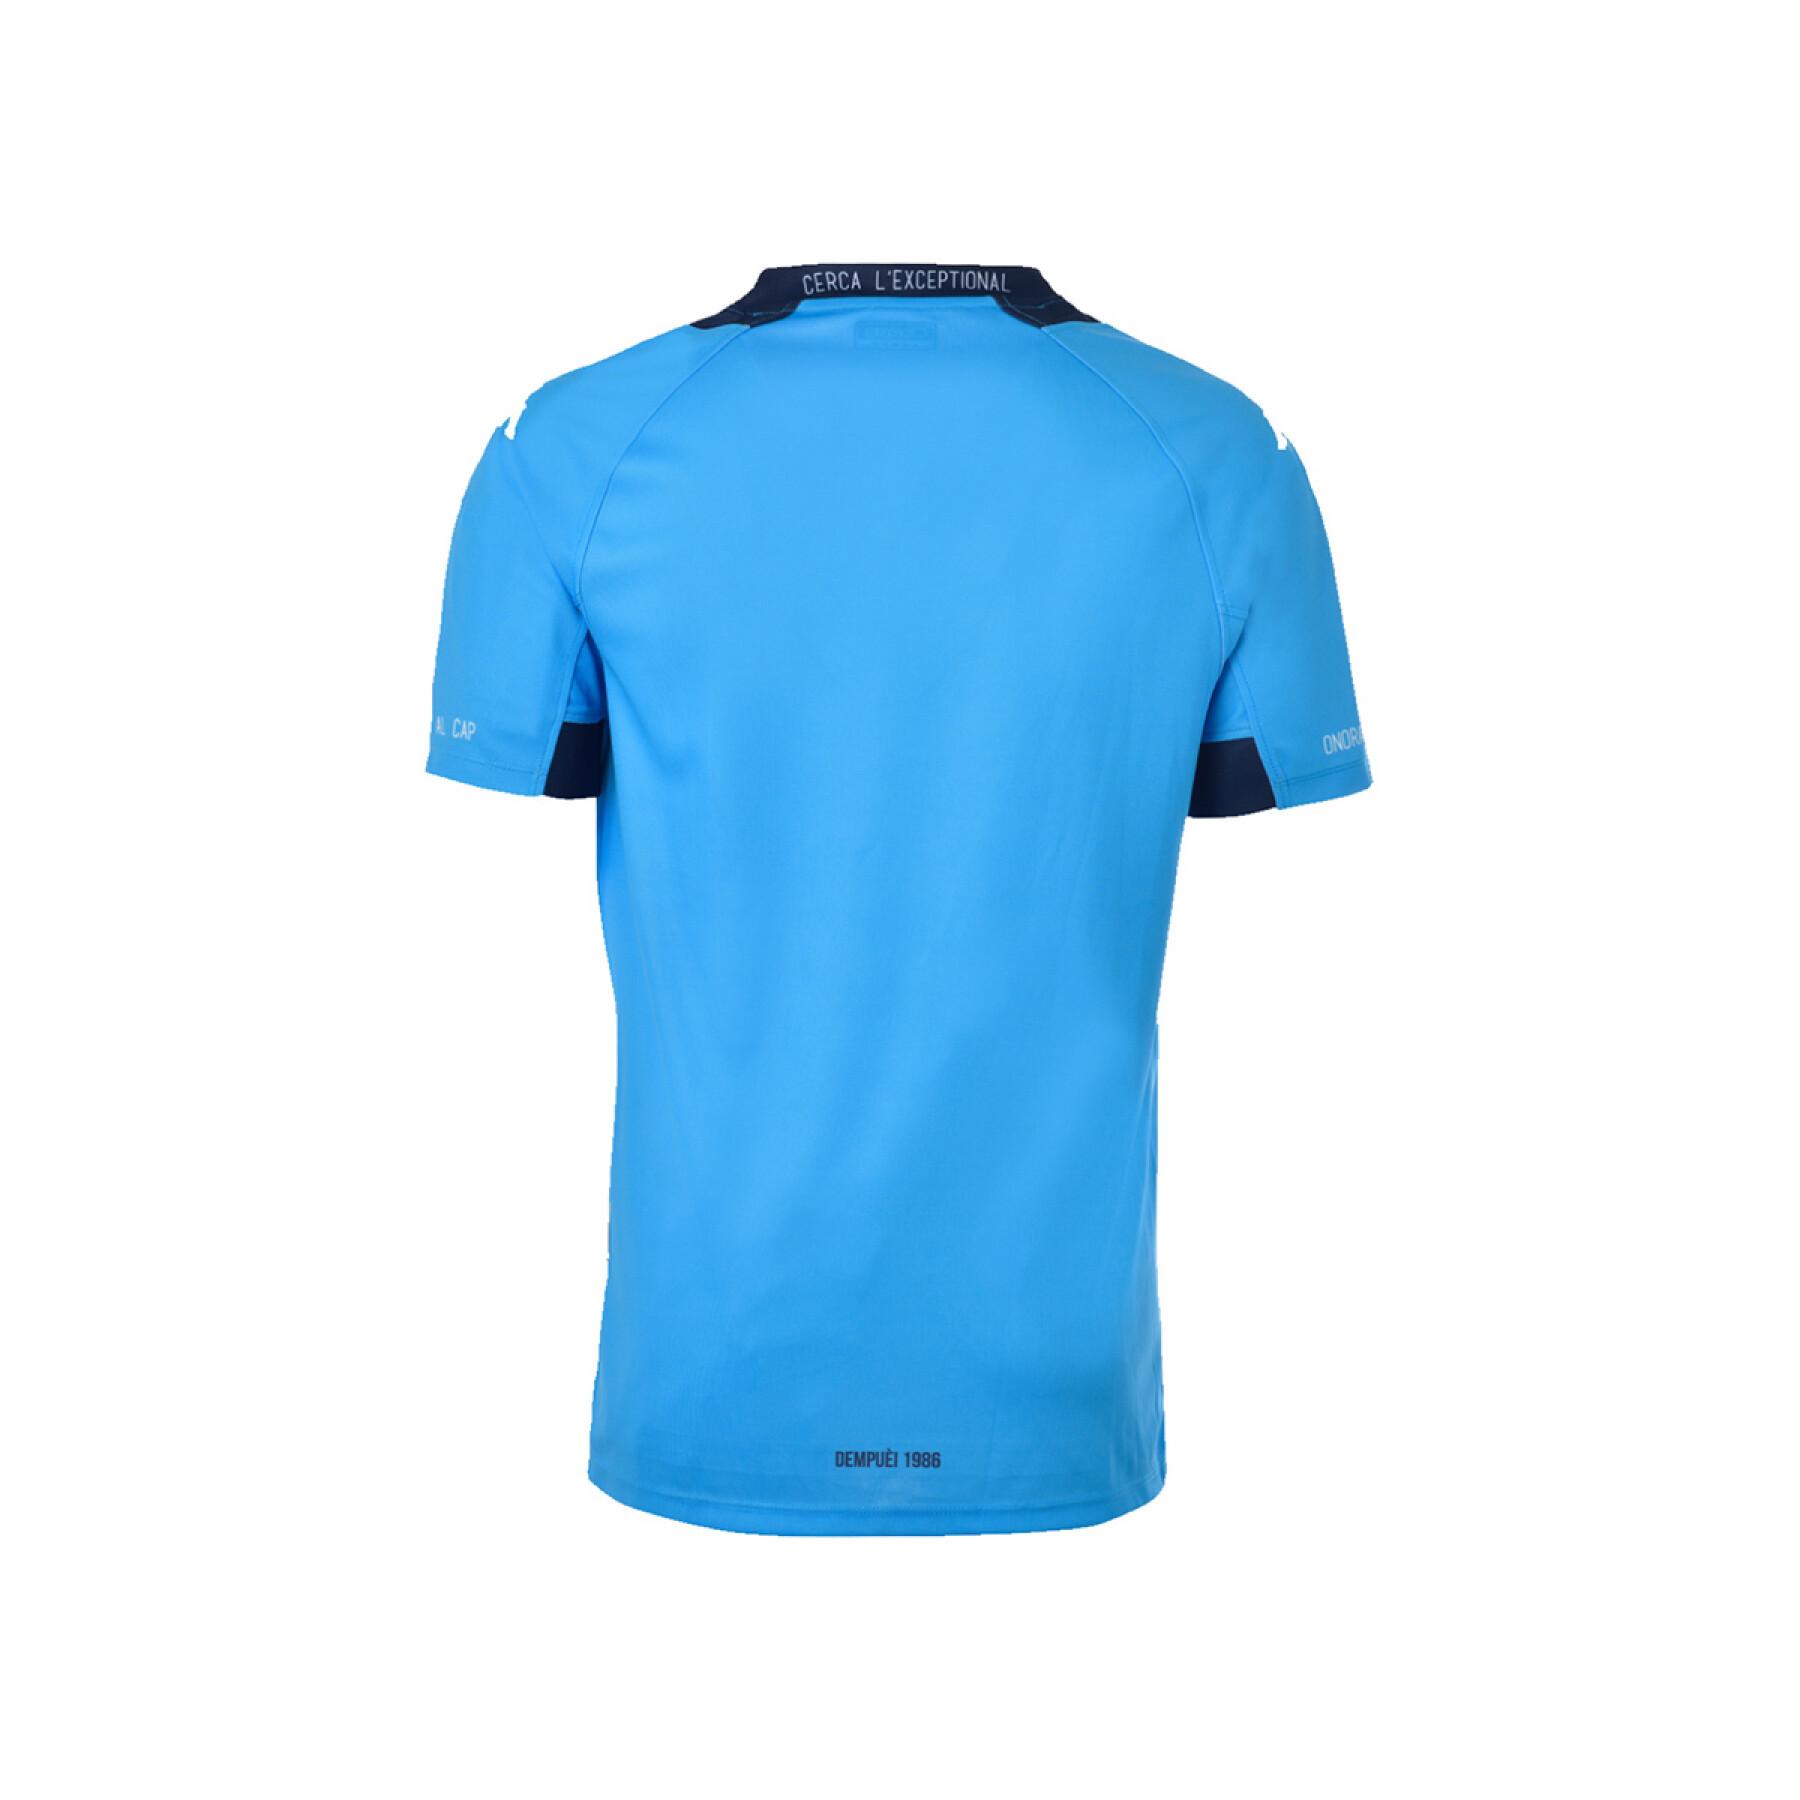 Maglia per bambini Montpellier Hérault Rugby 2019/20